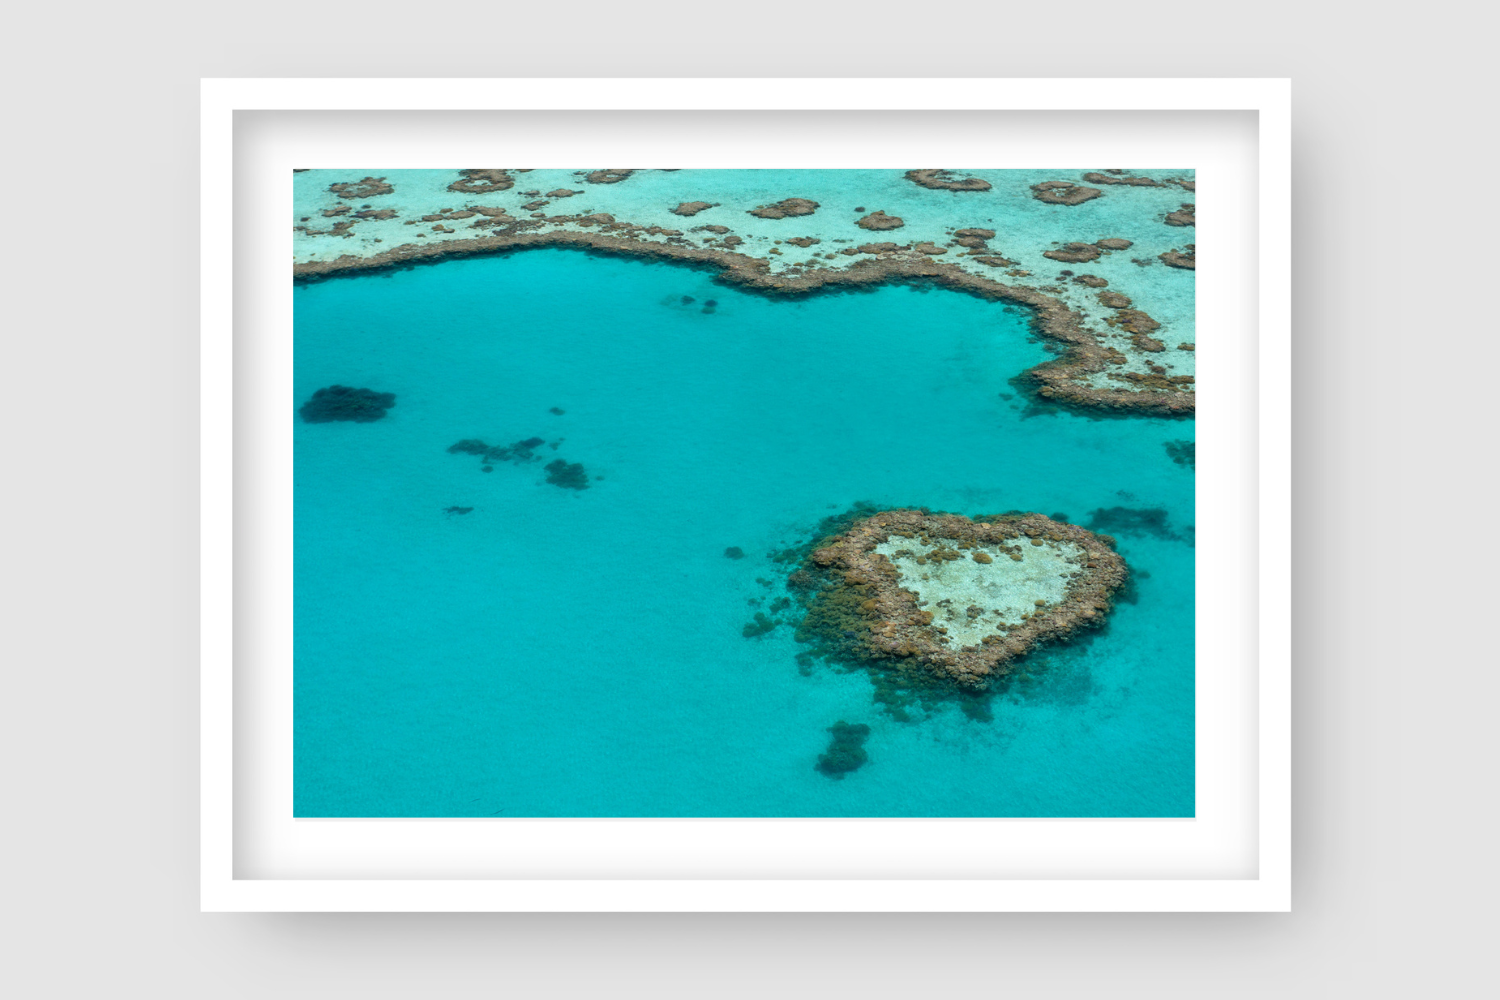 large heart shaped coral reef island surrounded by turquise water and more reef